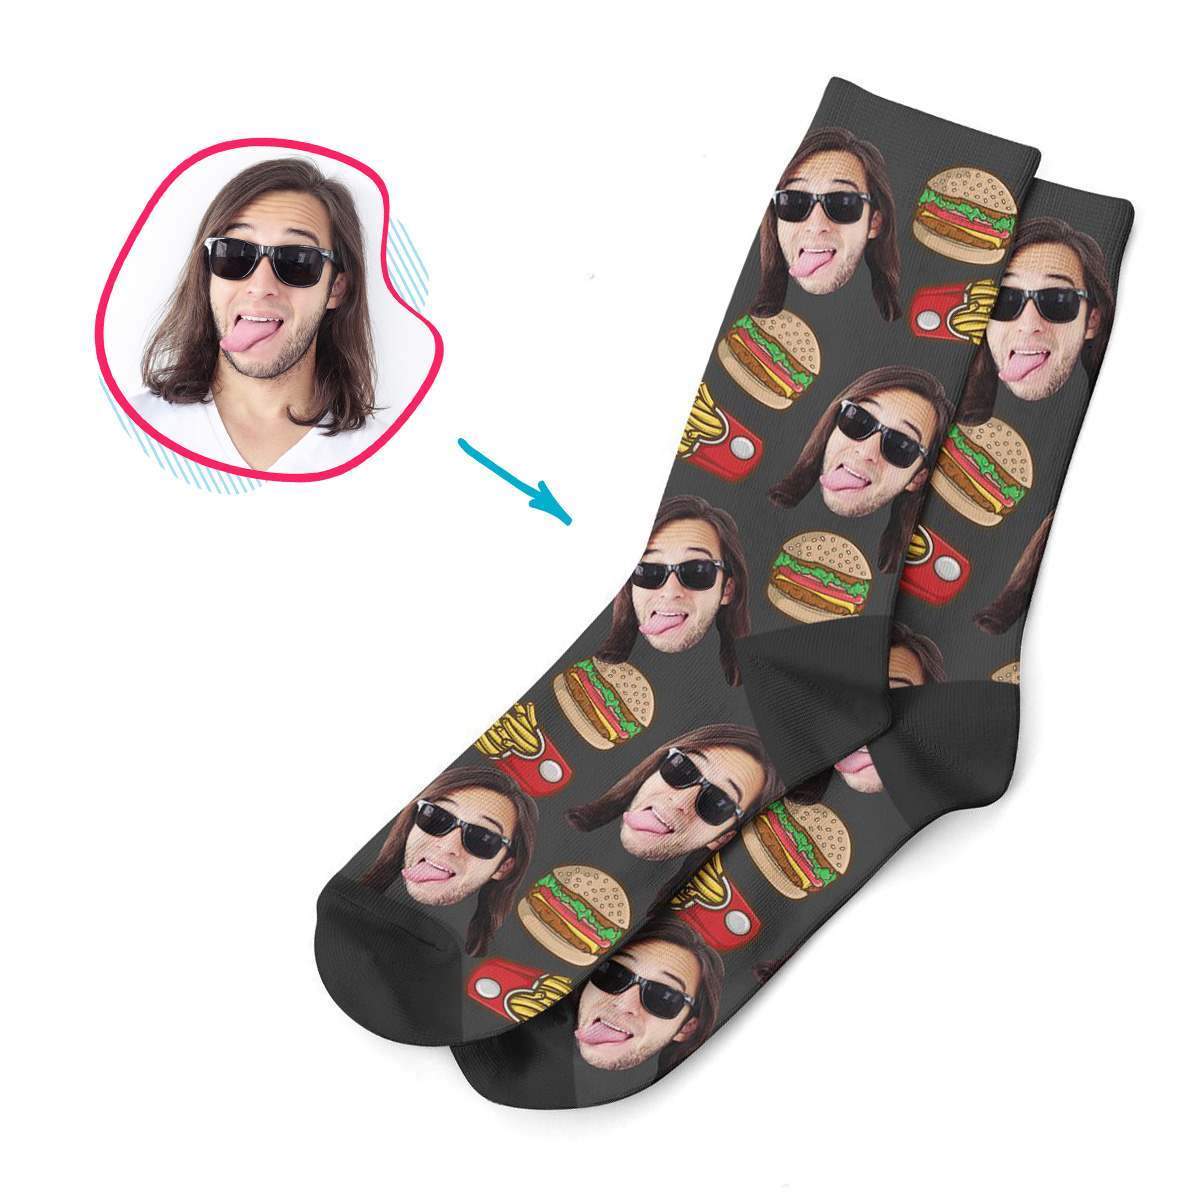 dark Fastfood socks personalized with photo of face printed on them